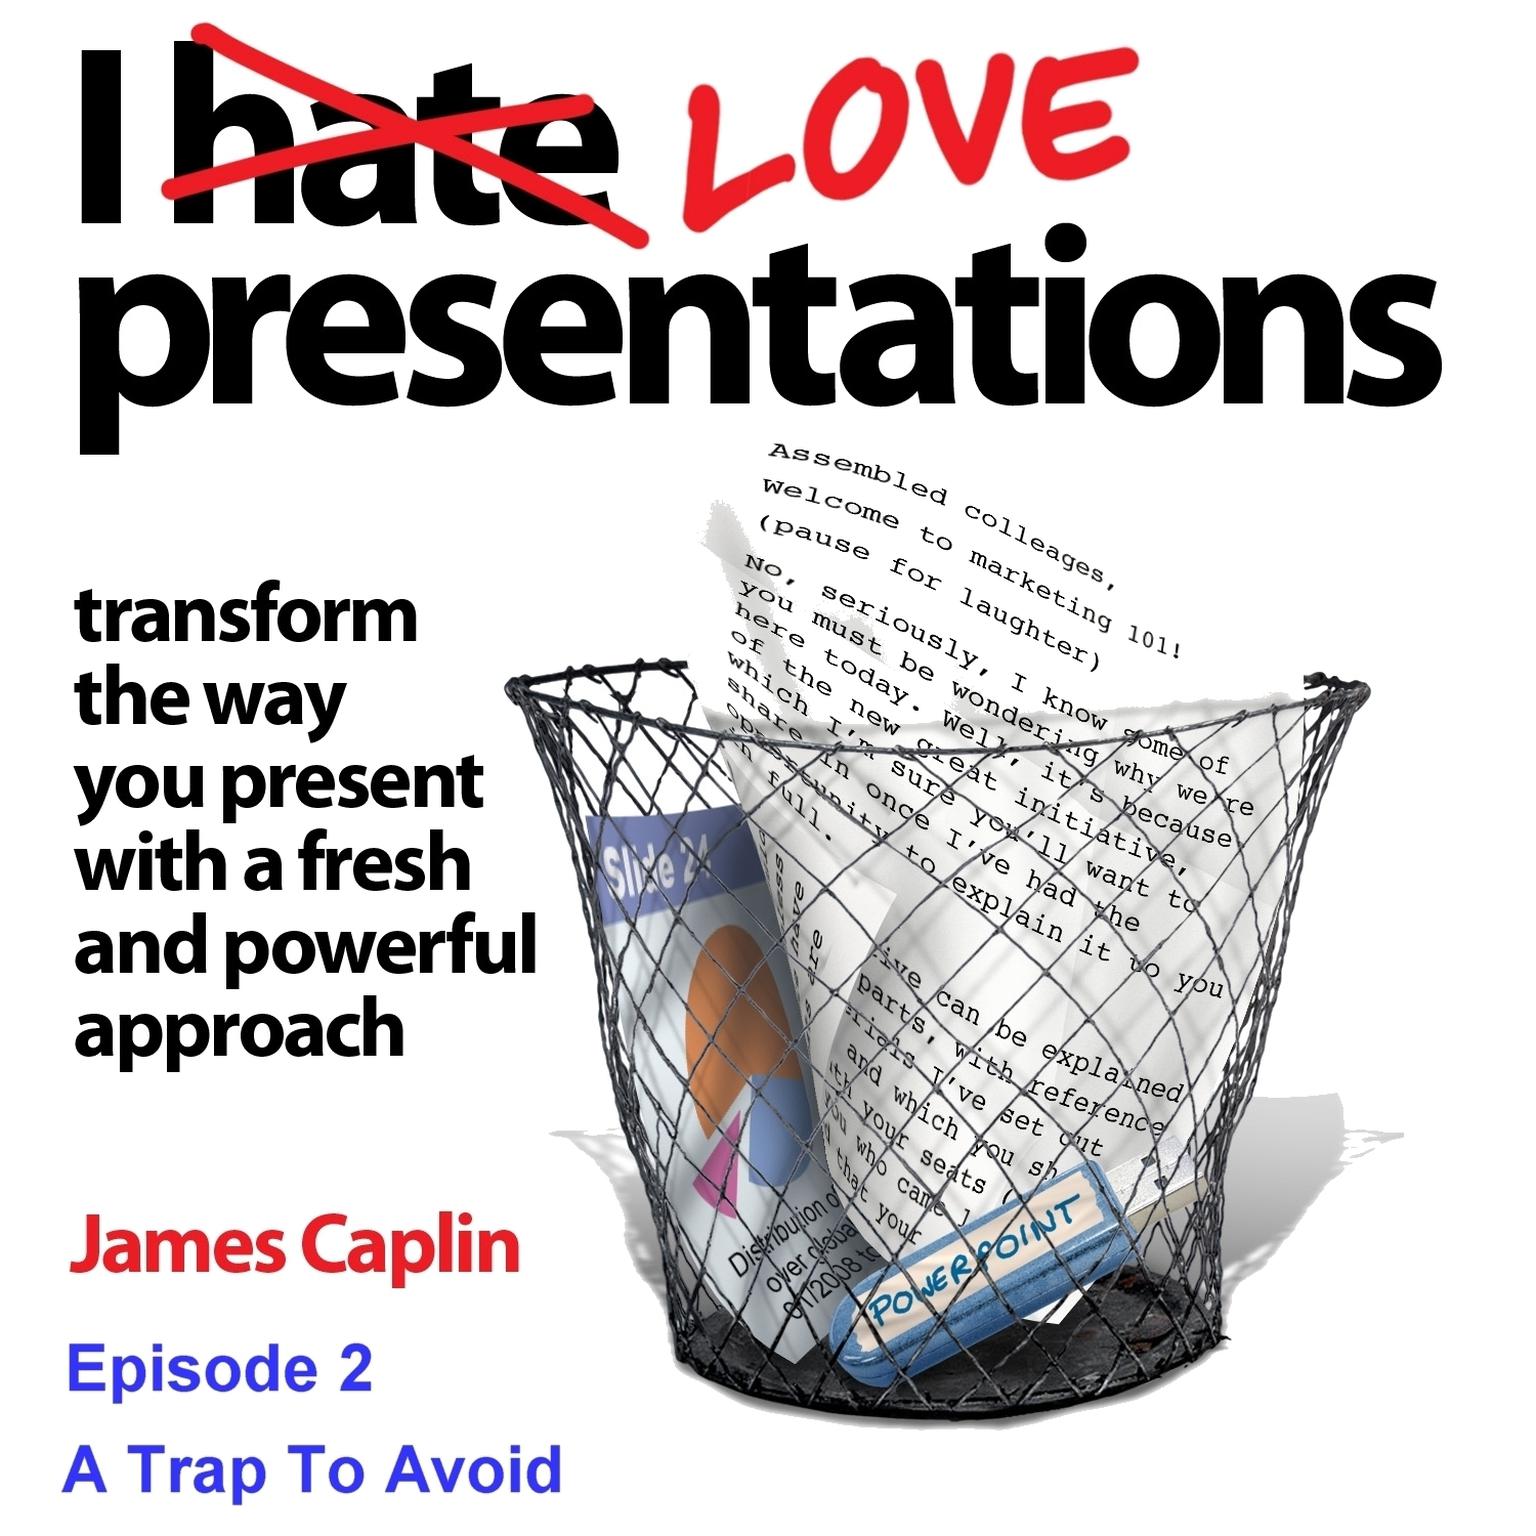 I Love Presentations 2: A Trap to Avoid Audiobook, by James Caplin